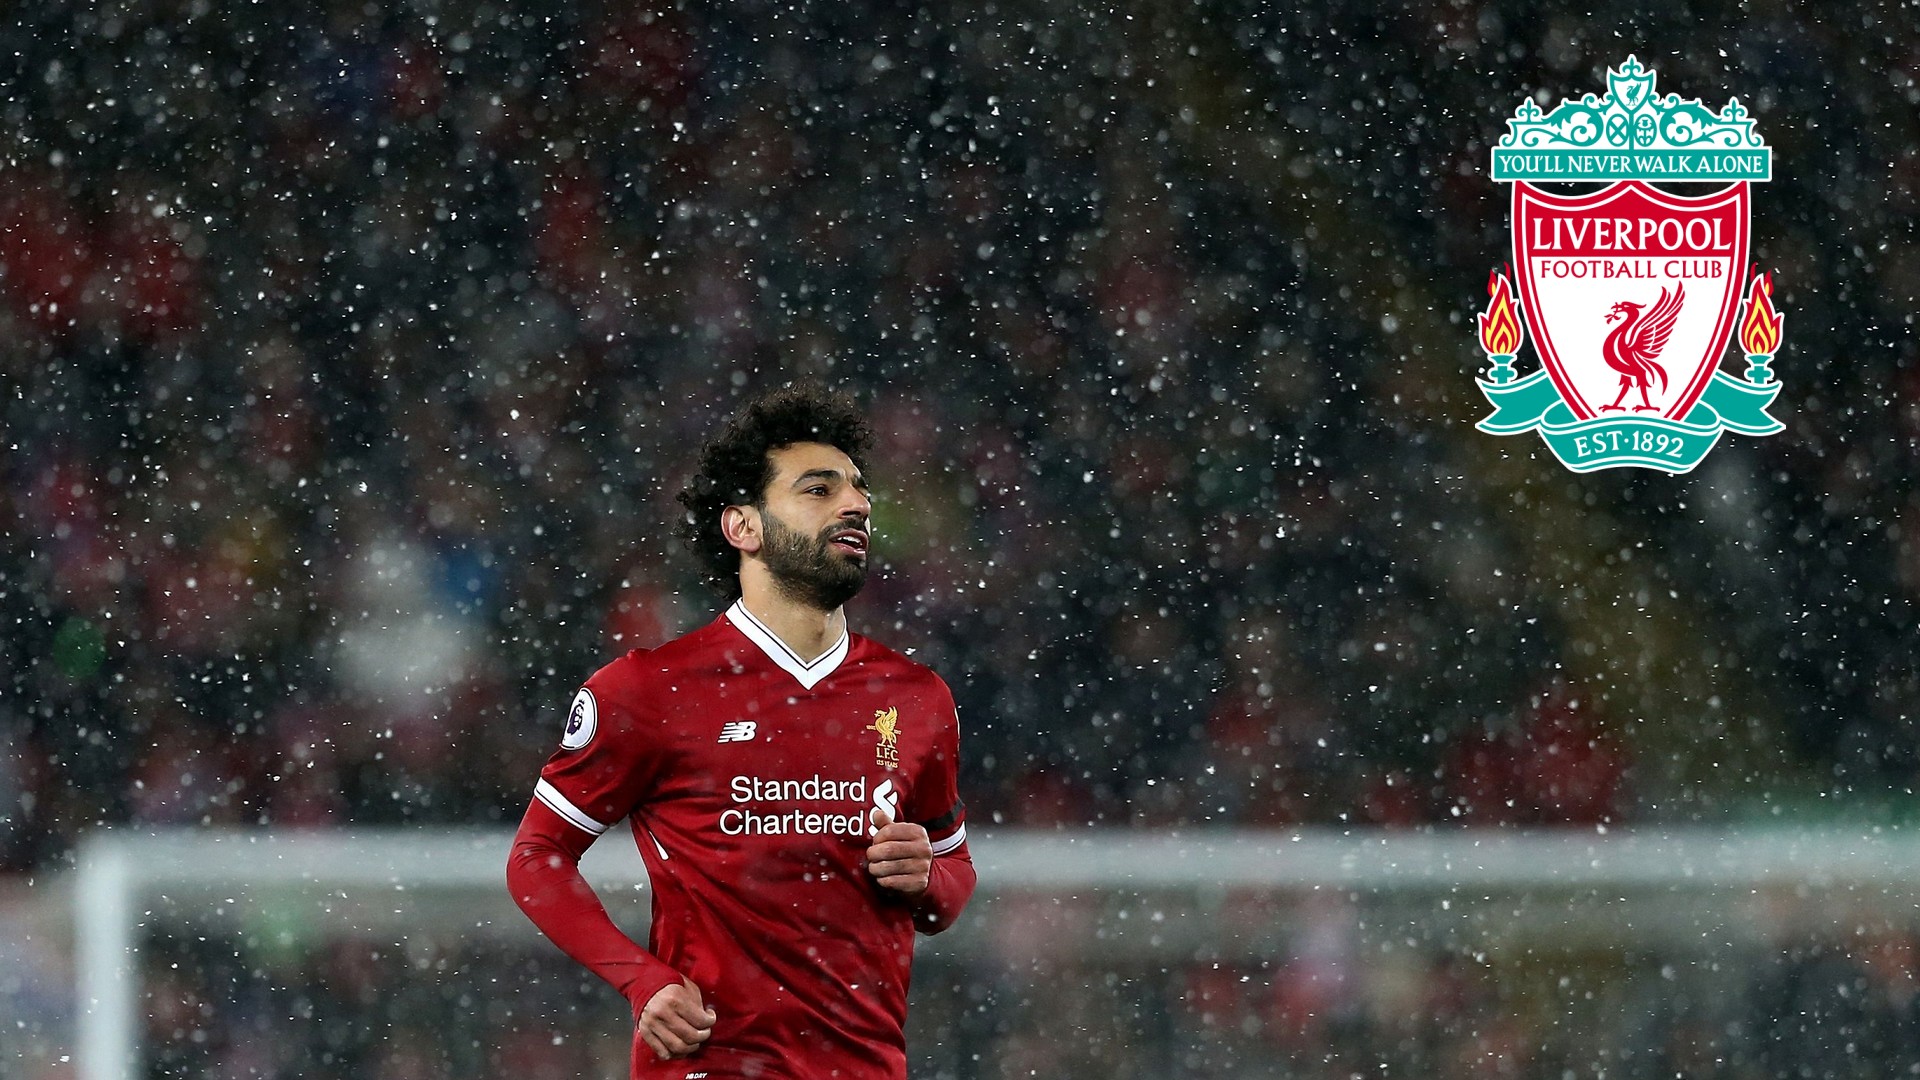 Mohamed Salah Liverpool Desktop Wallpaper with resolution 1920X1080 pixel. You can use this wallpaper as background for your desktop Computer Screensavers, Android or iPhone smartphones